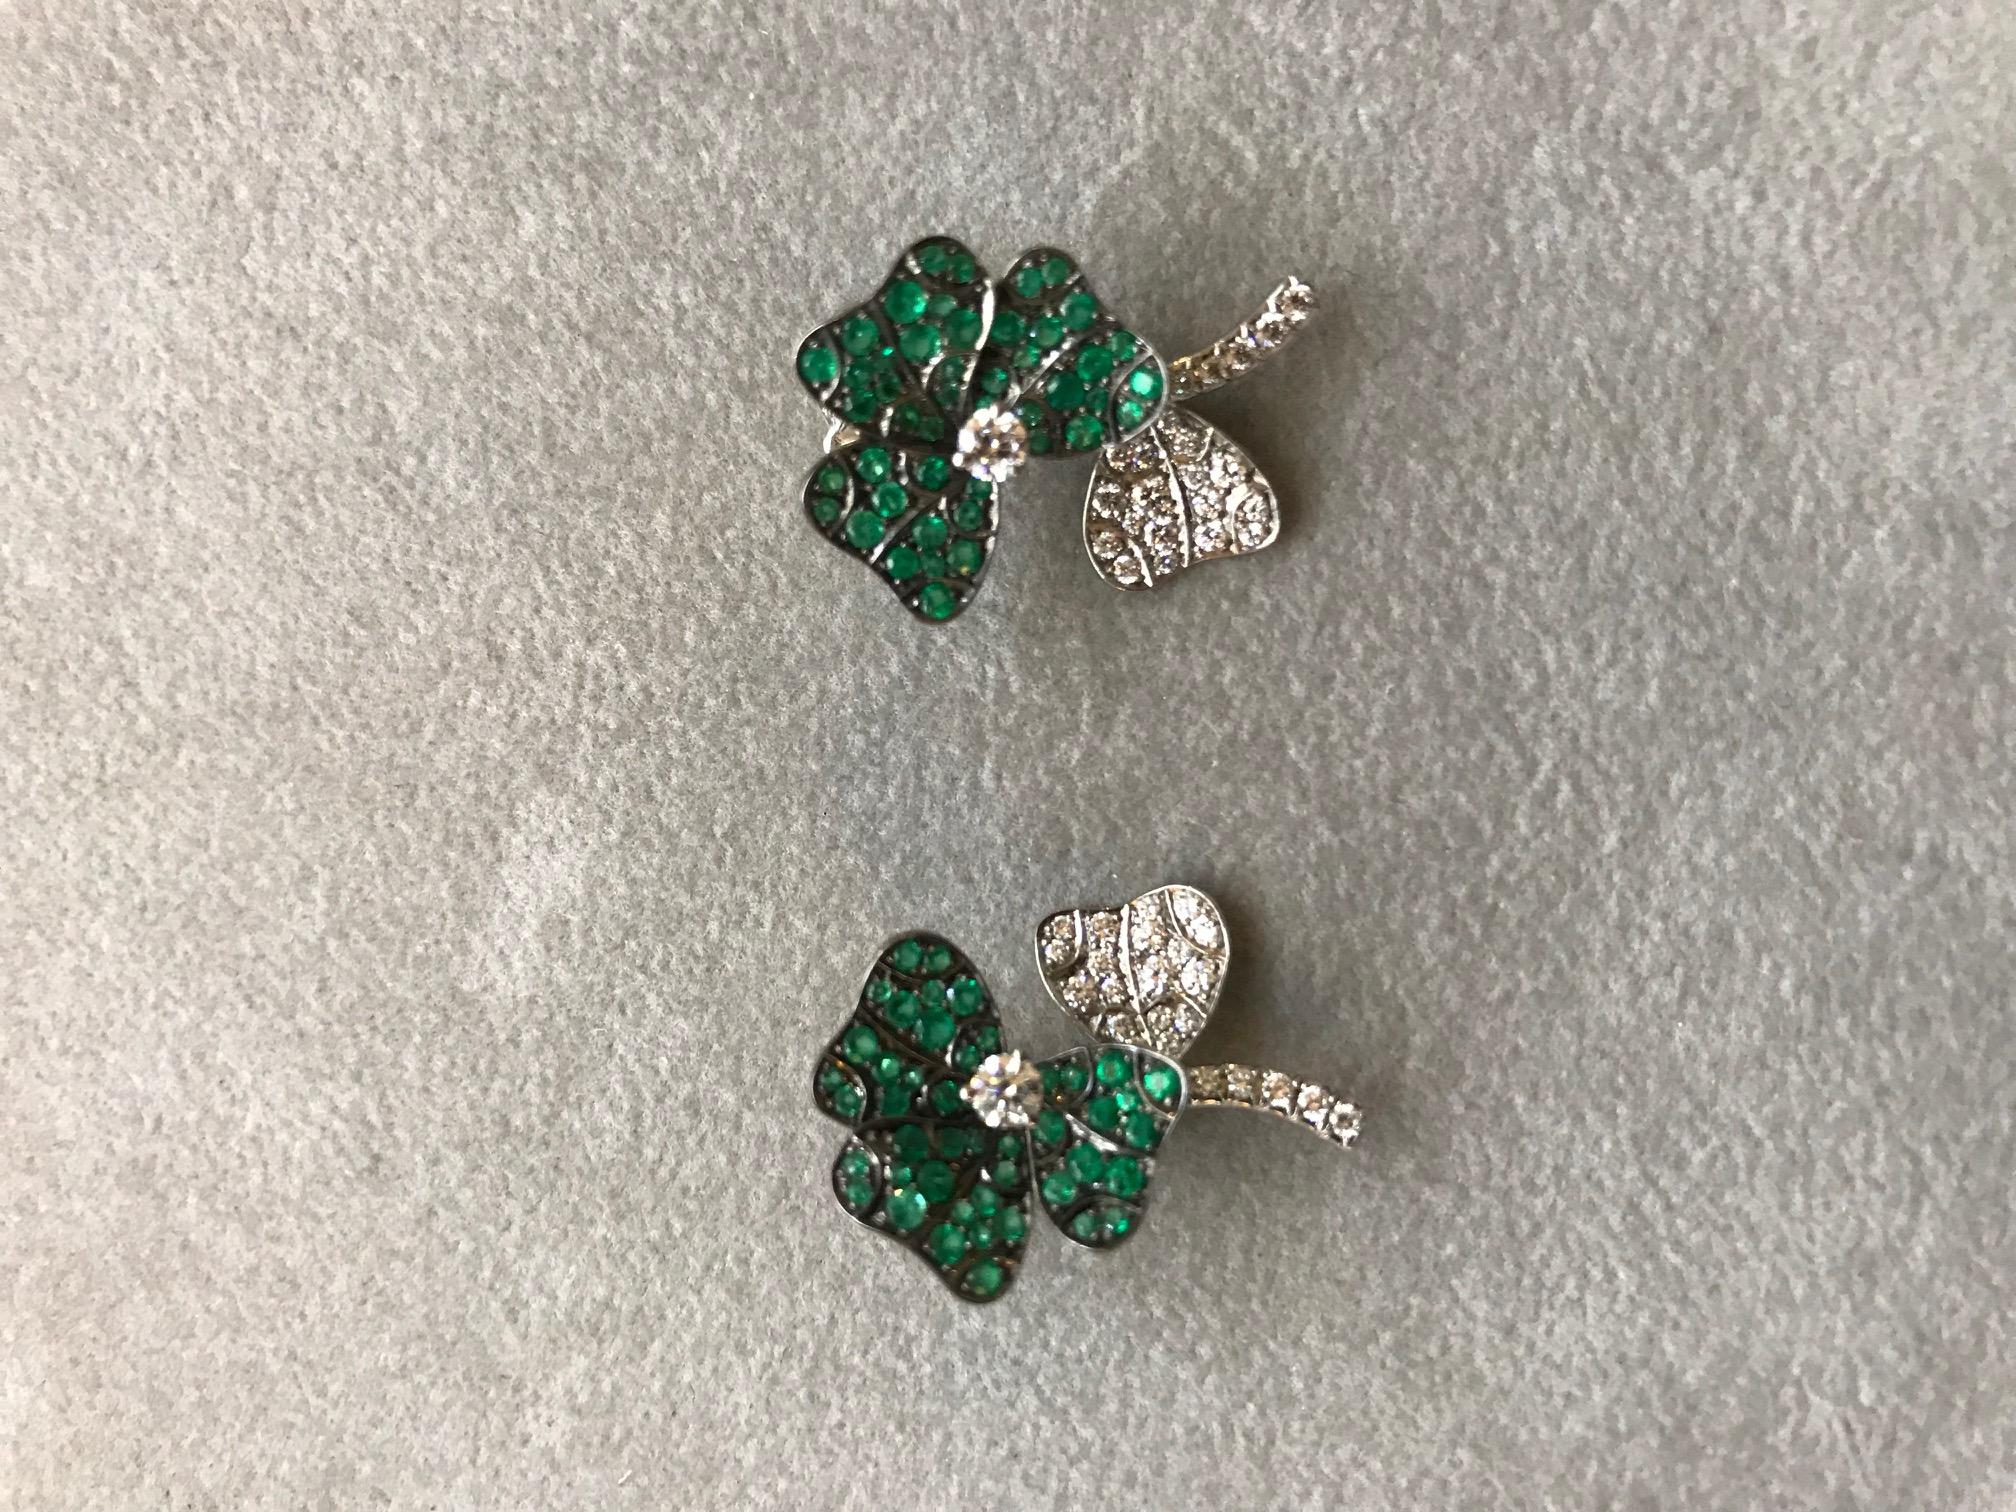 Paving: Emeralds 0,94 ct. & White Diamonds 0,70 ct. 
Material: Palladium 950; White Gold 750; 
Length: 2,5 cm 
Width: 1,5 cm 

Earrings are available with different stones and also in different sizes. 
They can be worn as studs or as earclips. The